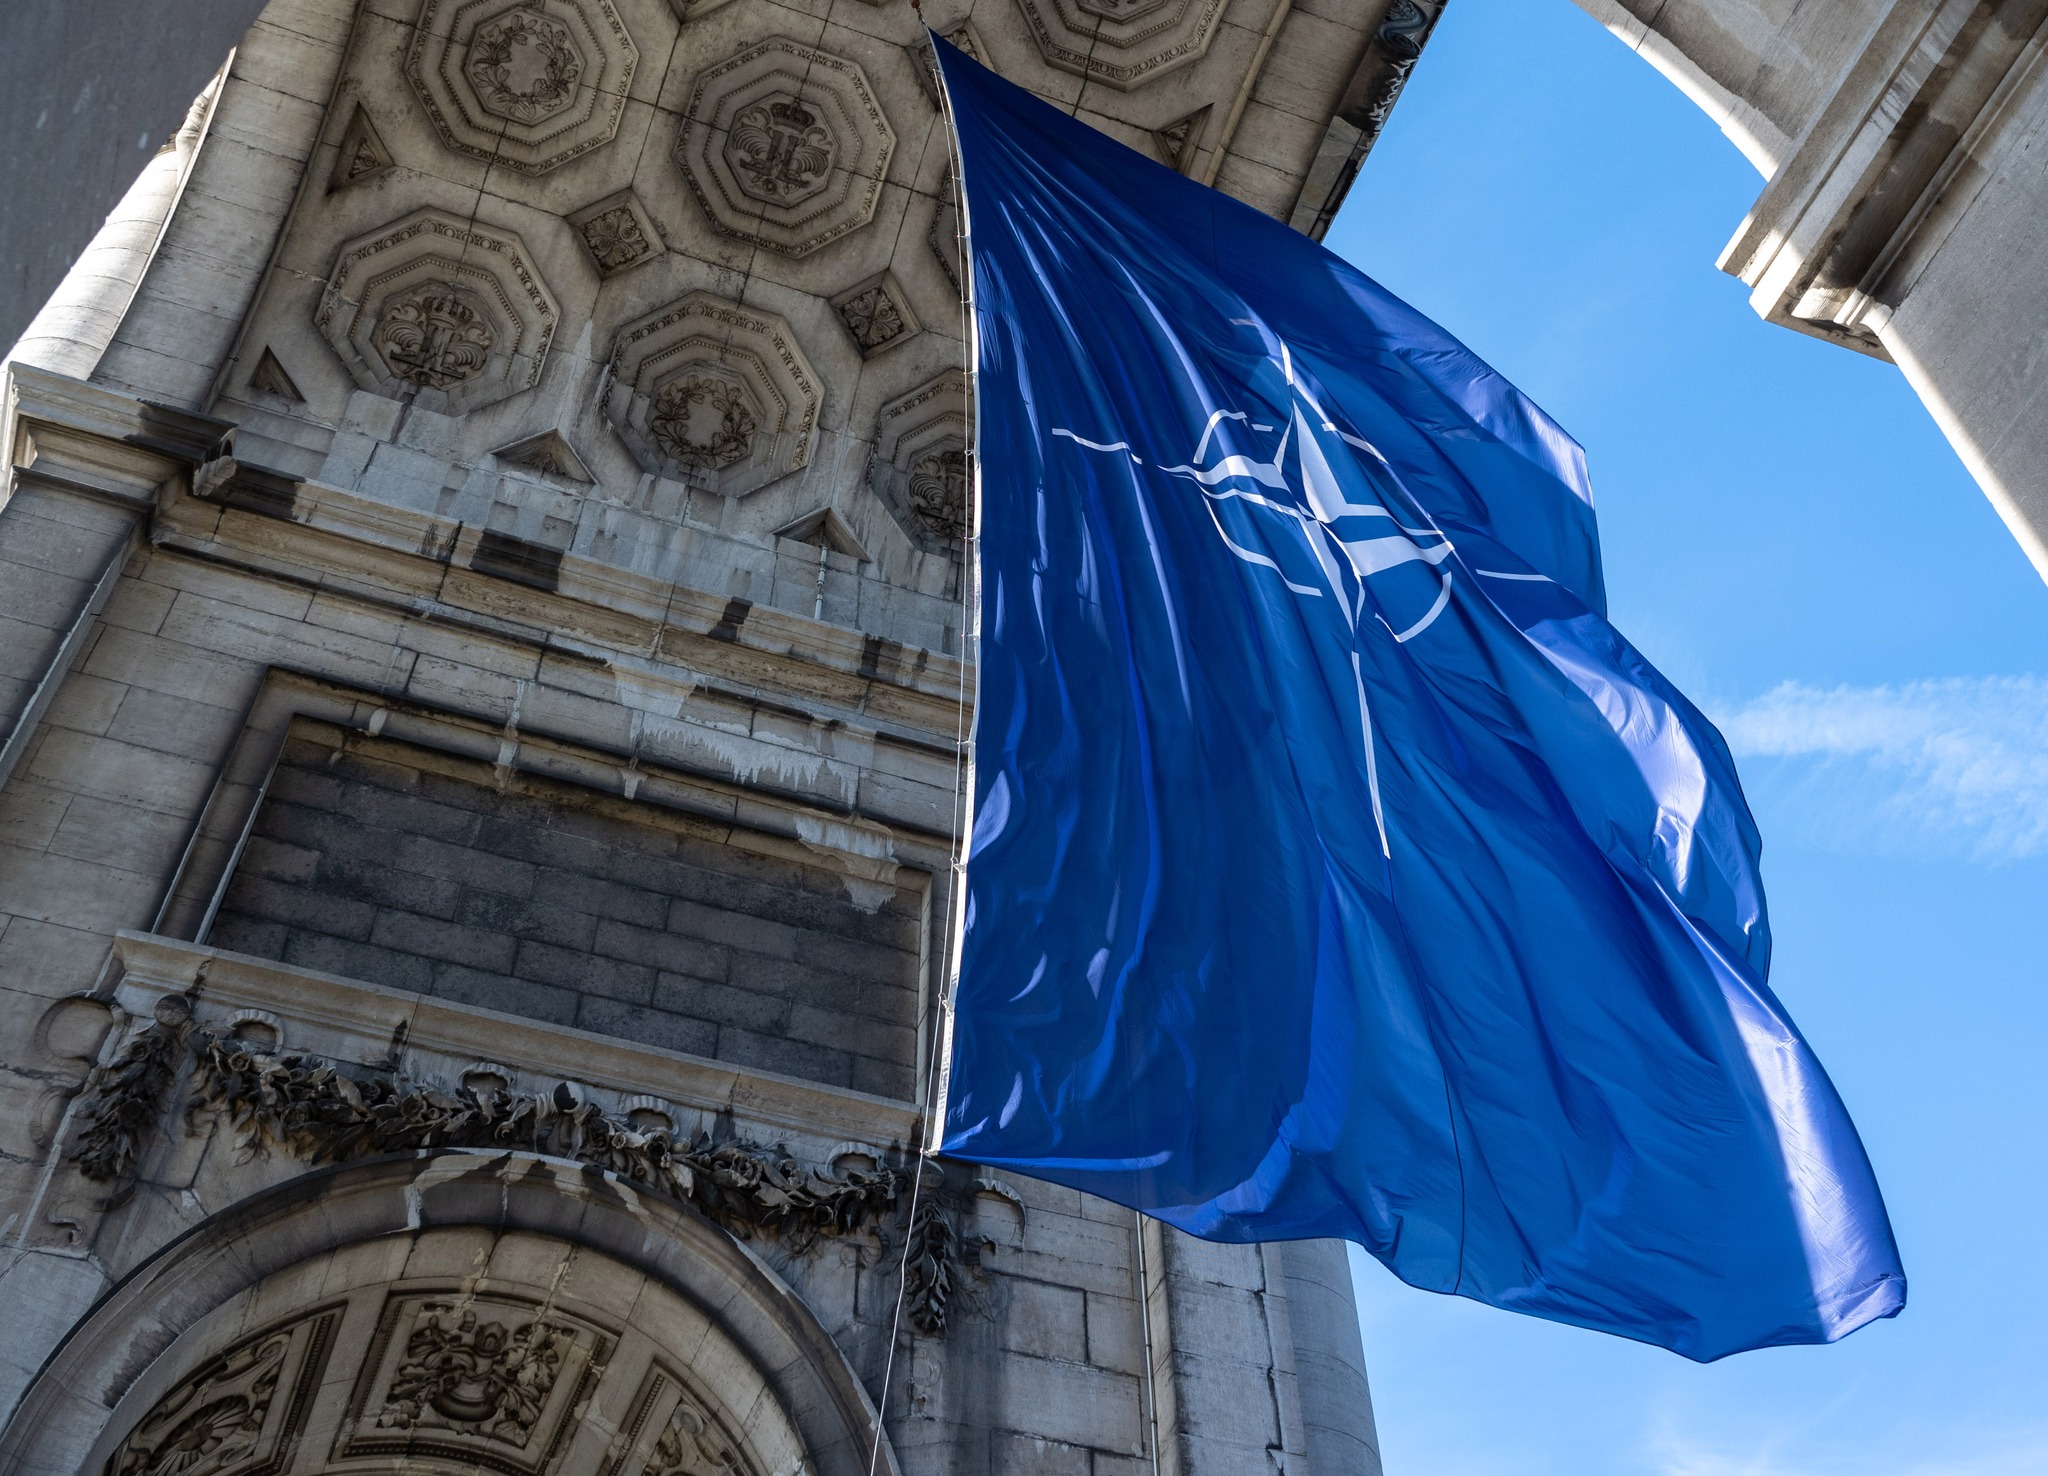 Hungary Cannot Support the NATO Accession of a Country at War